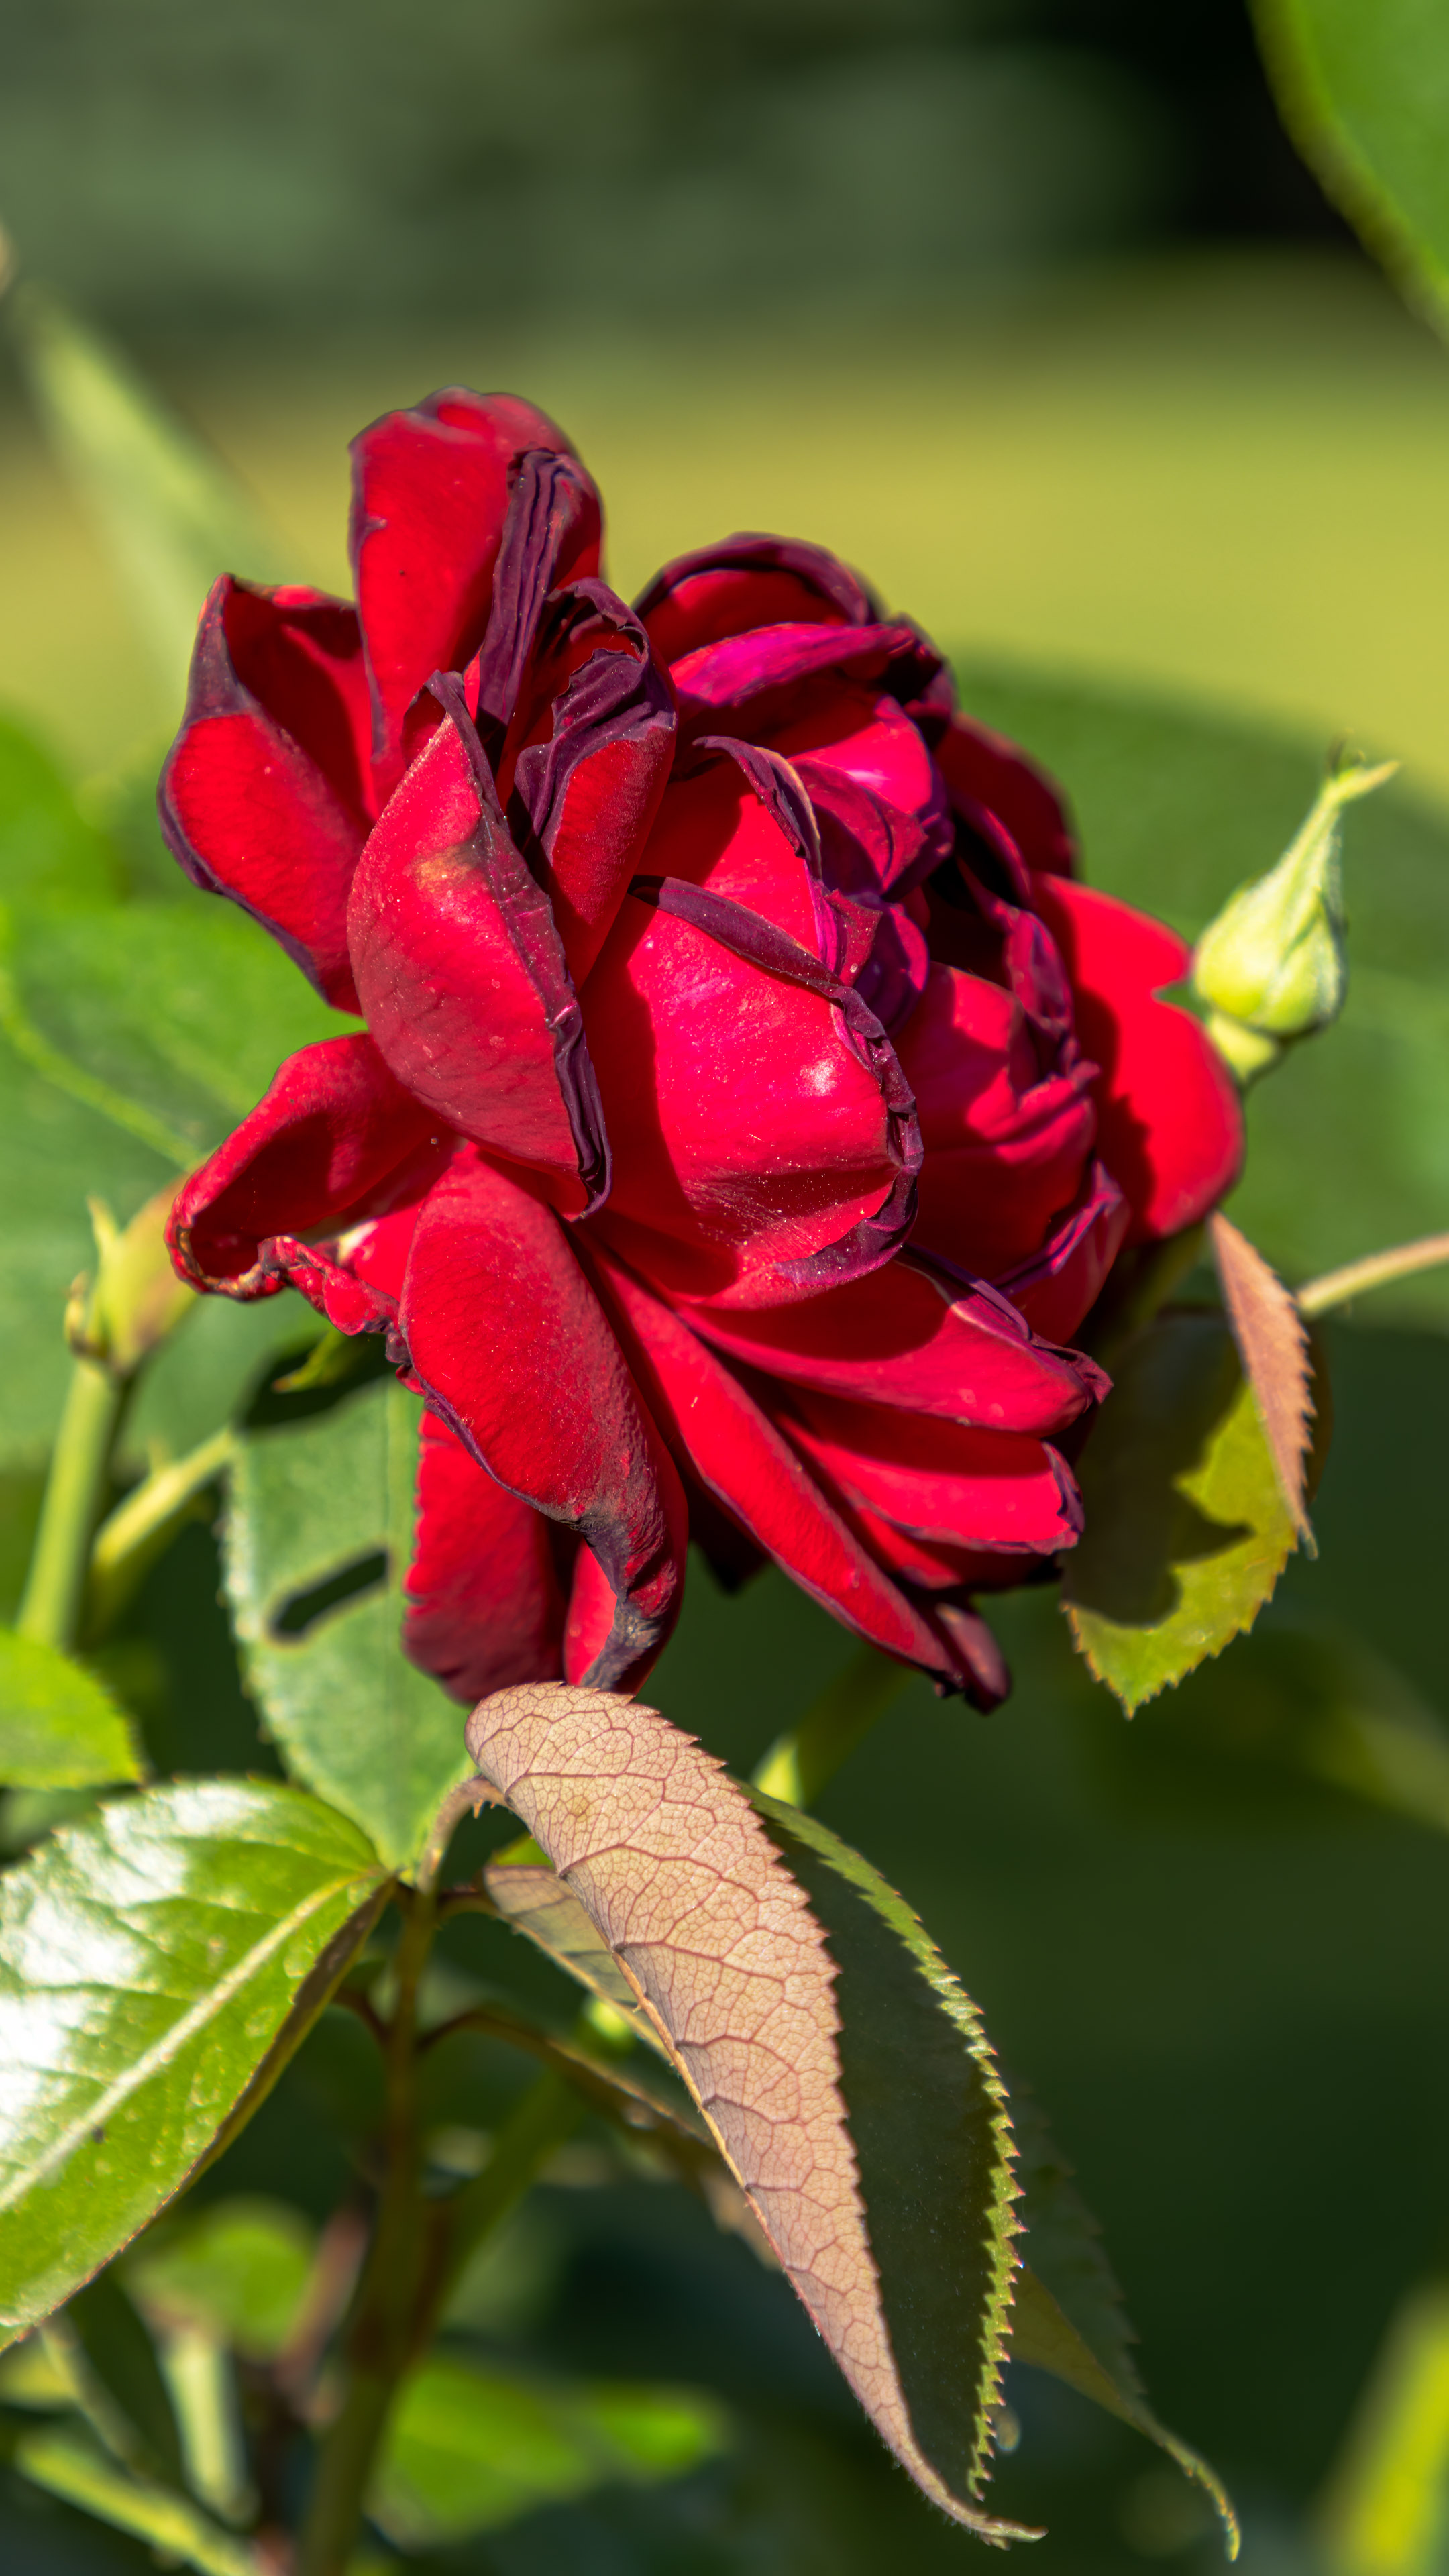 Imbue your iPhone with the romantic allure of a red rose on a green background flower wallpaper.